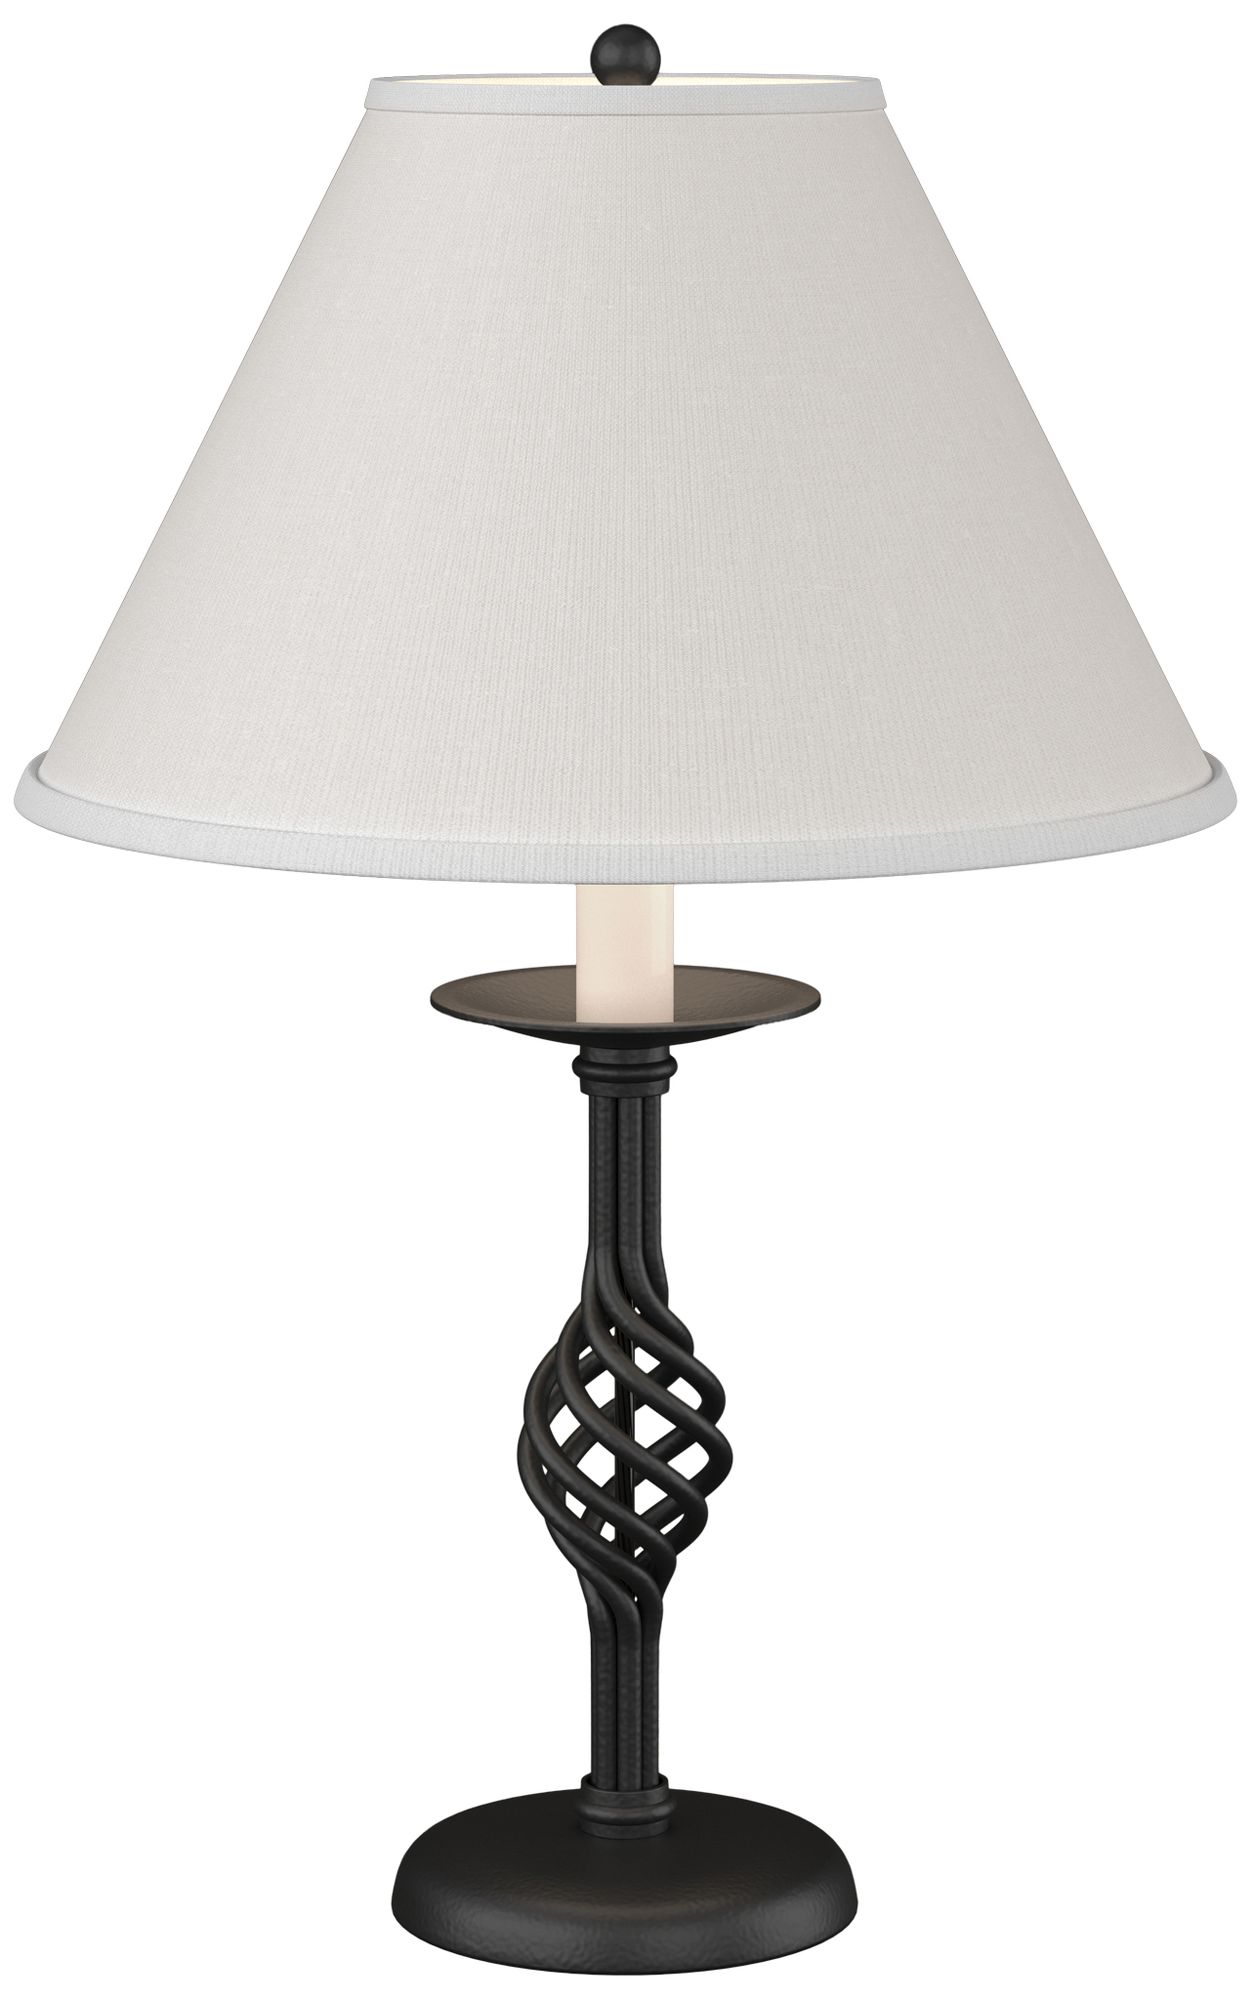 Twist Basket 25.5" High Black Table Lamp With Natural Anna Shade